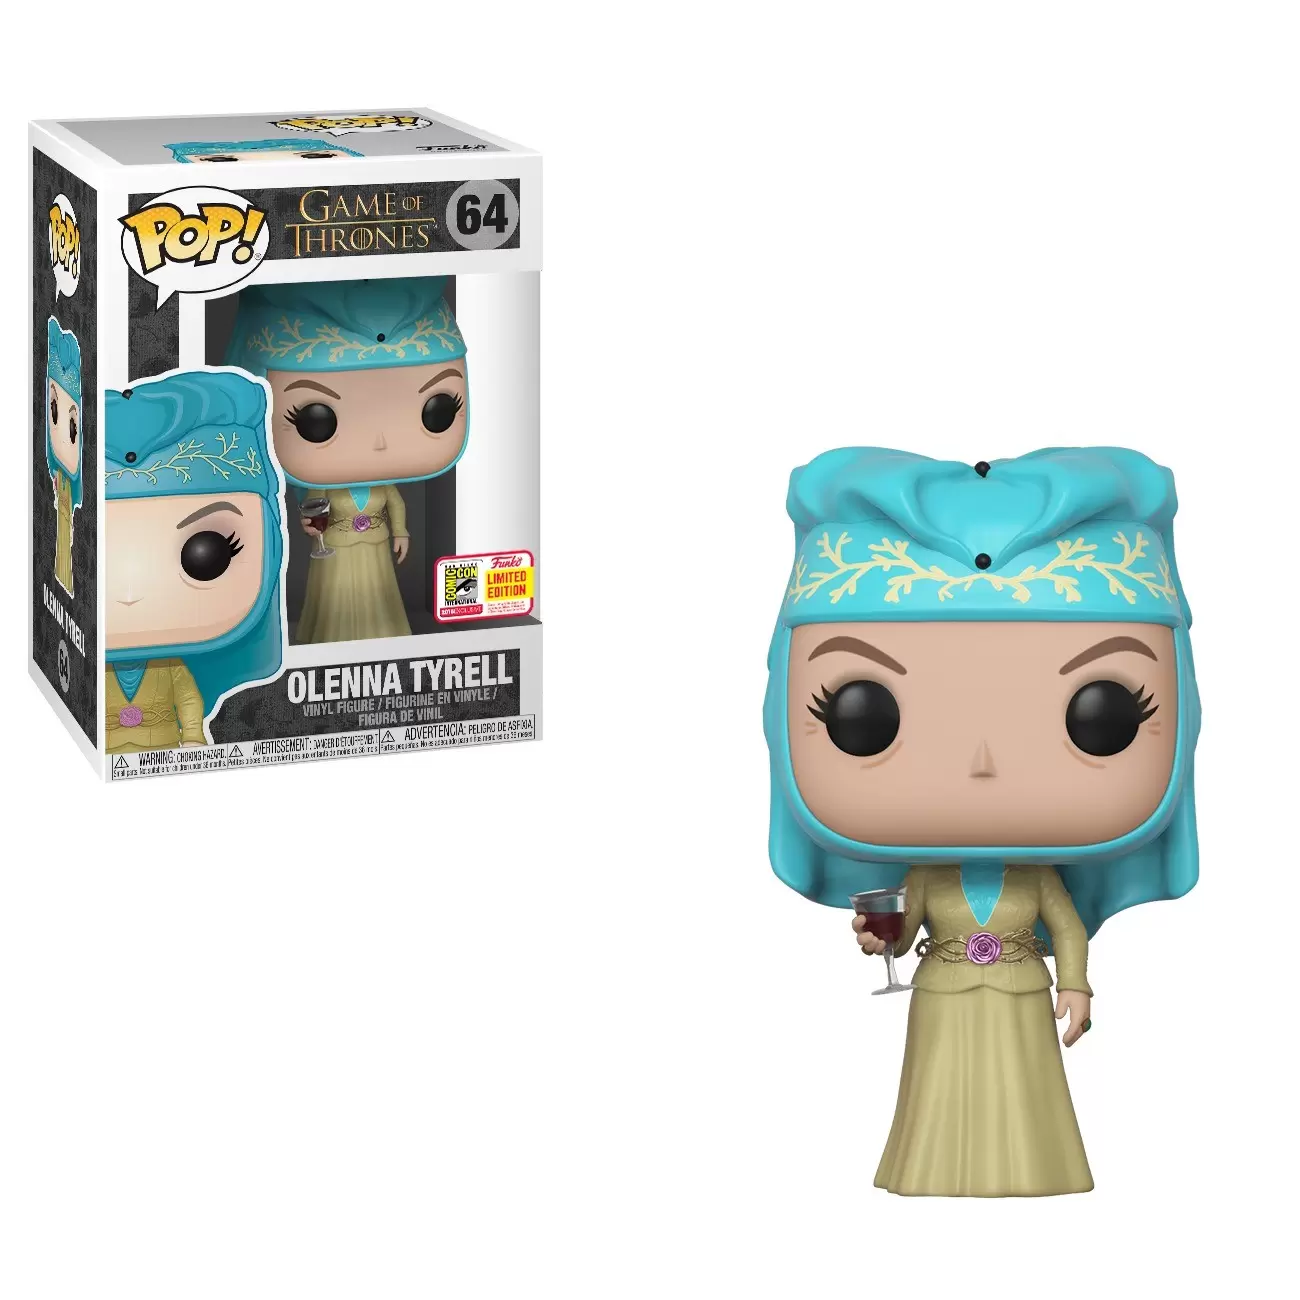 POP! Game of Thrones - Game of Thrones - Olenna Tyrell